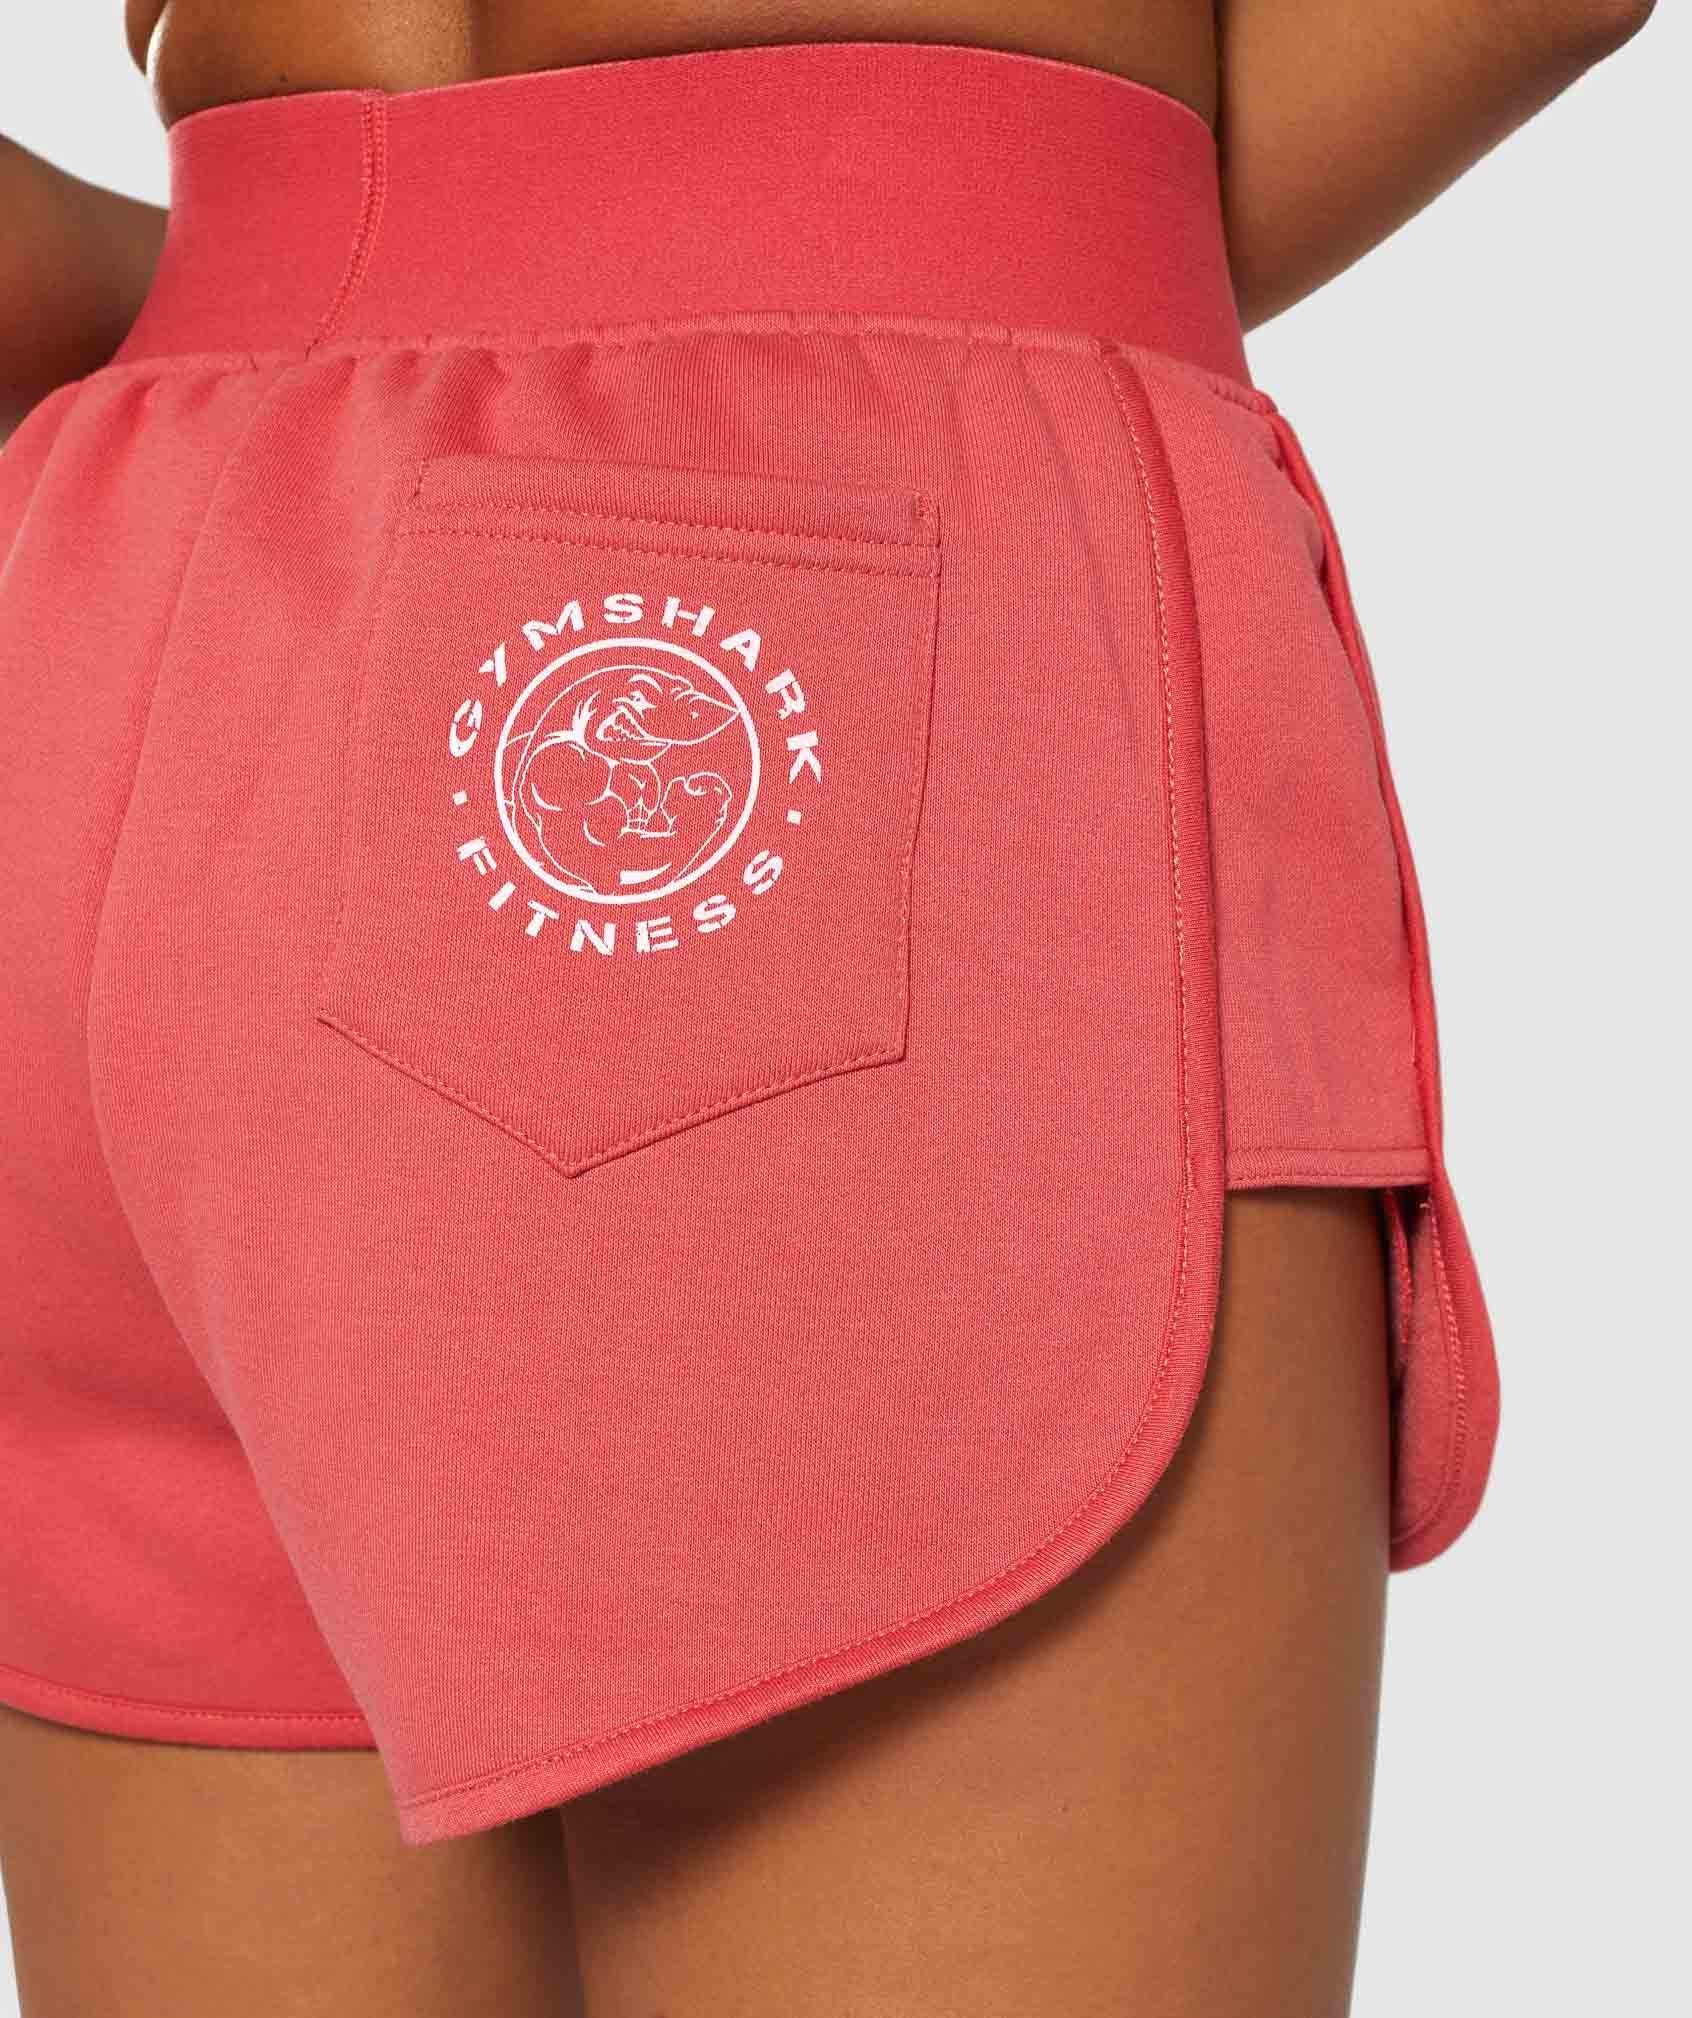 Legacy Fitness Shorts in Brick Red - view 5